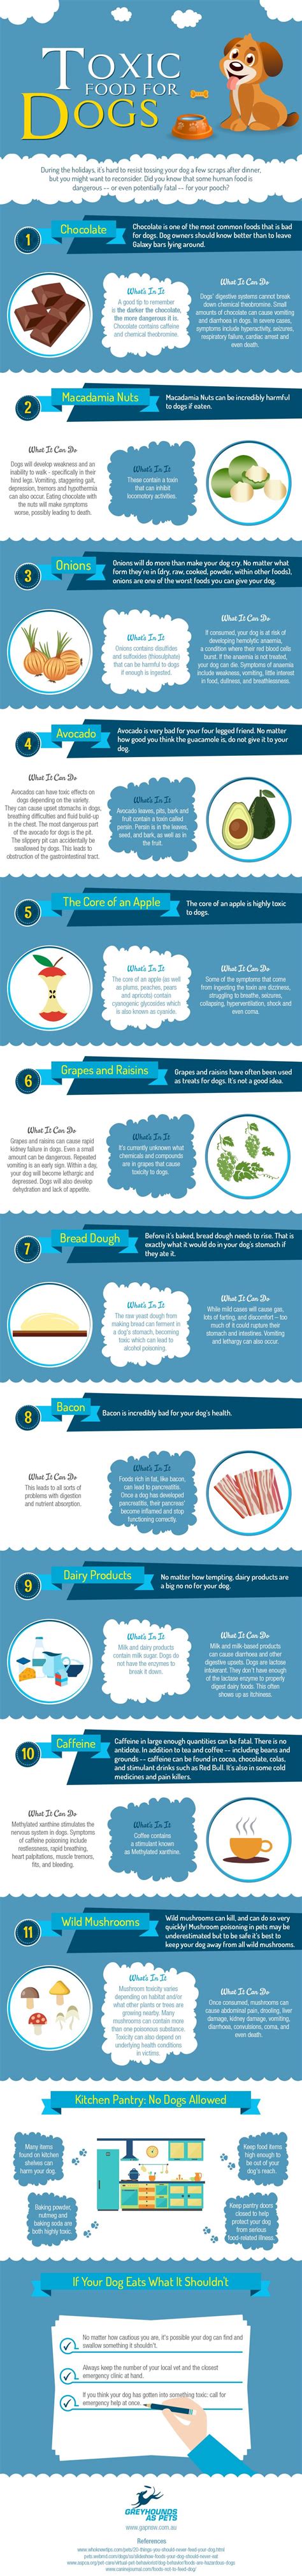 toxic foods   dogs infographic animal bliss dog health tips